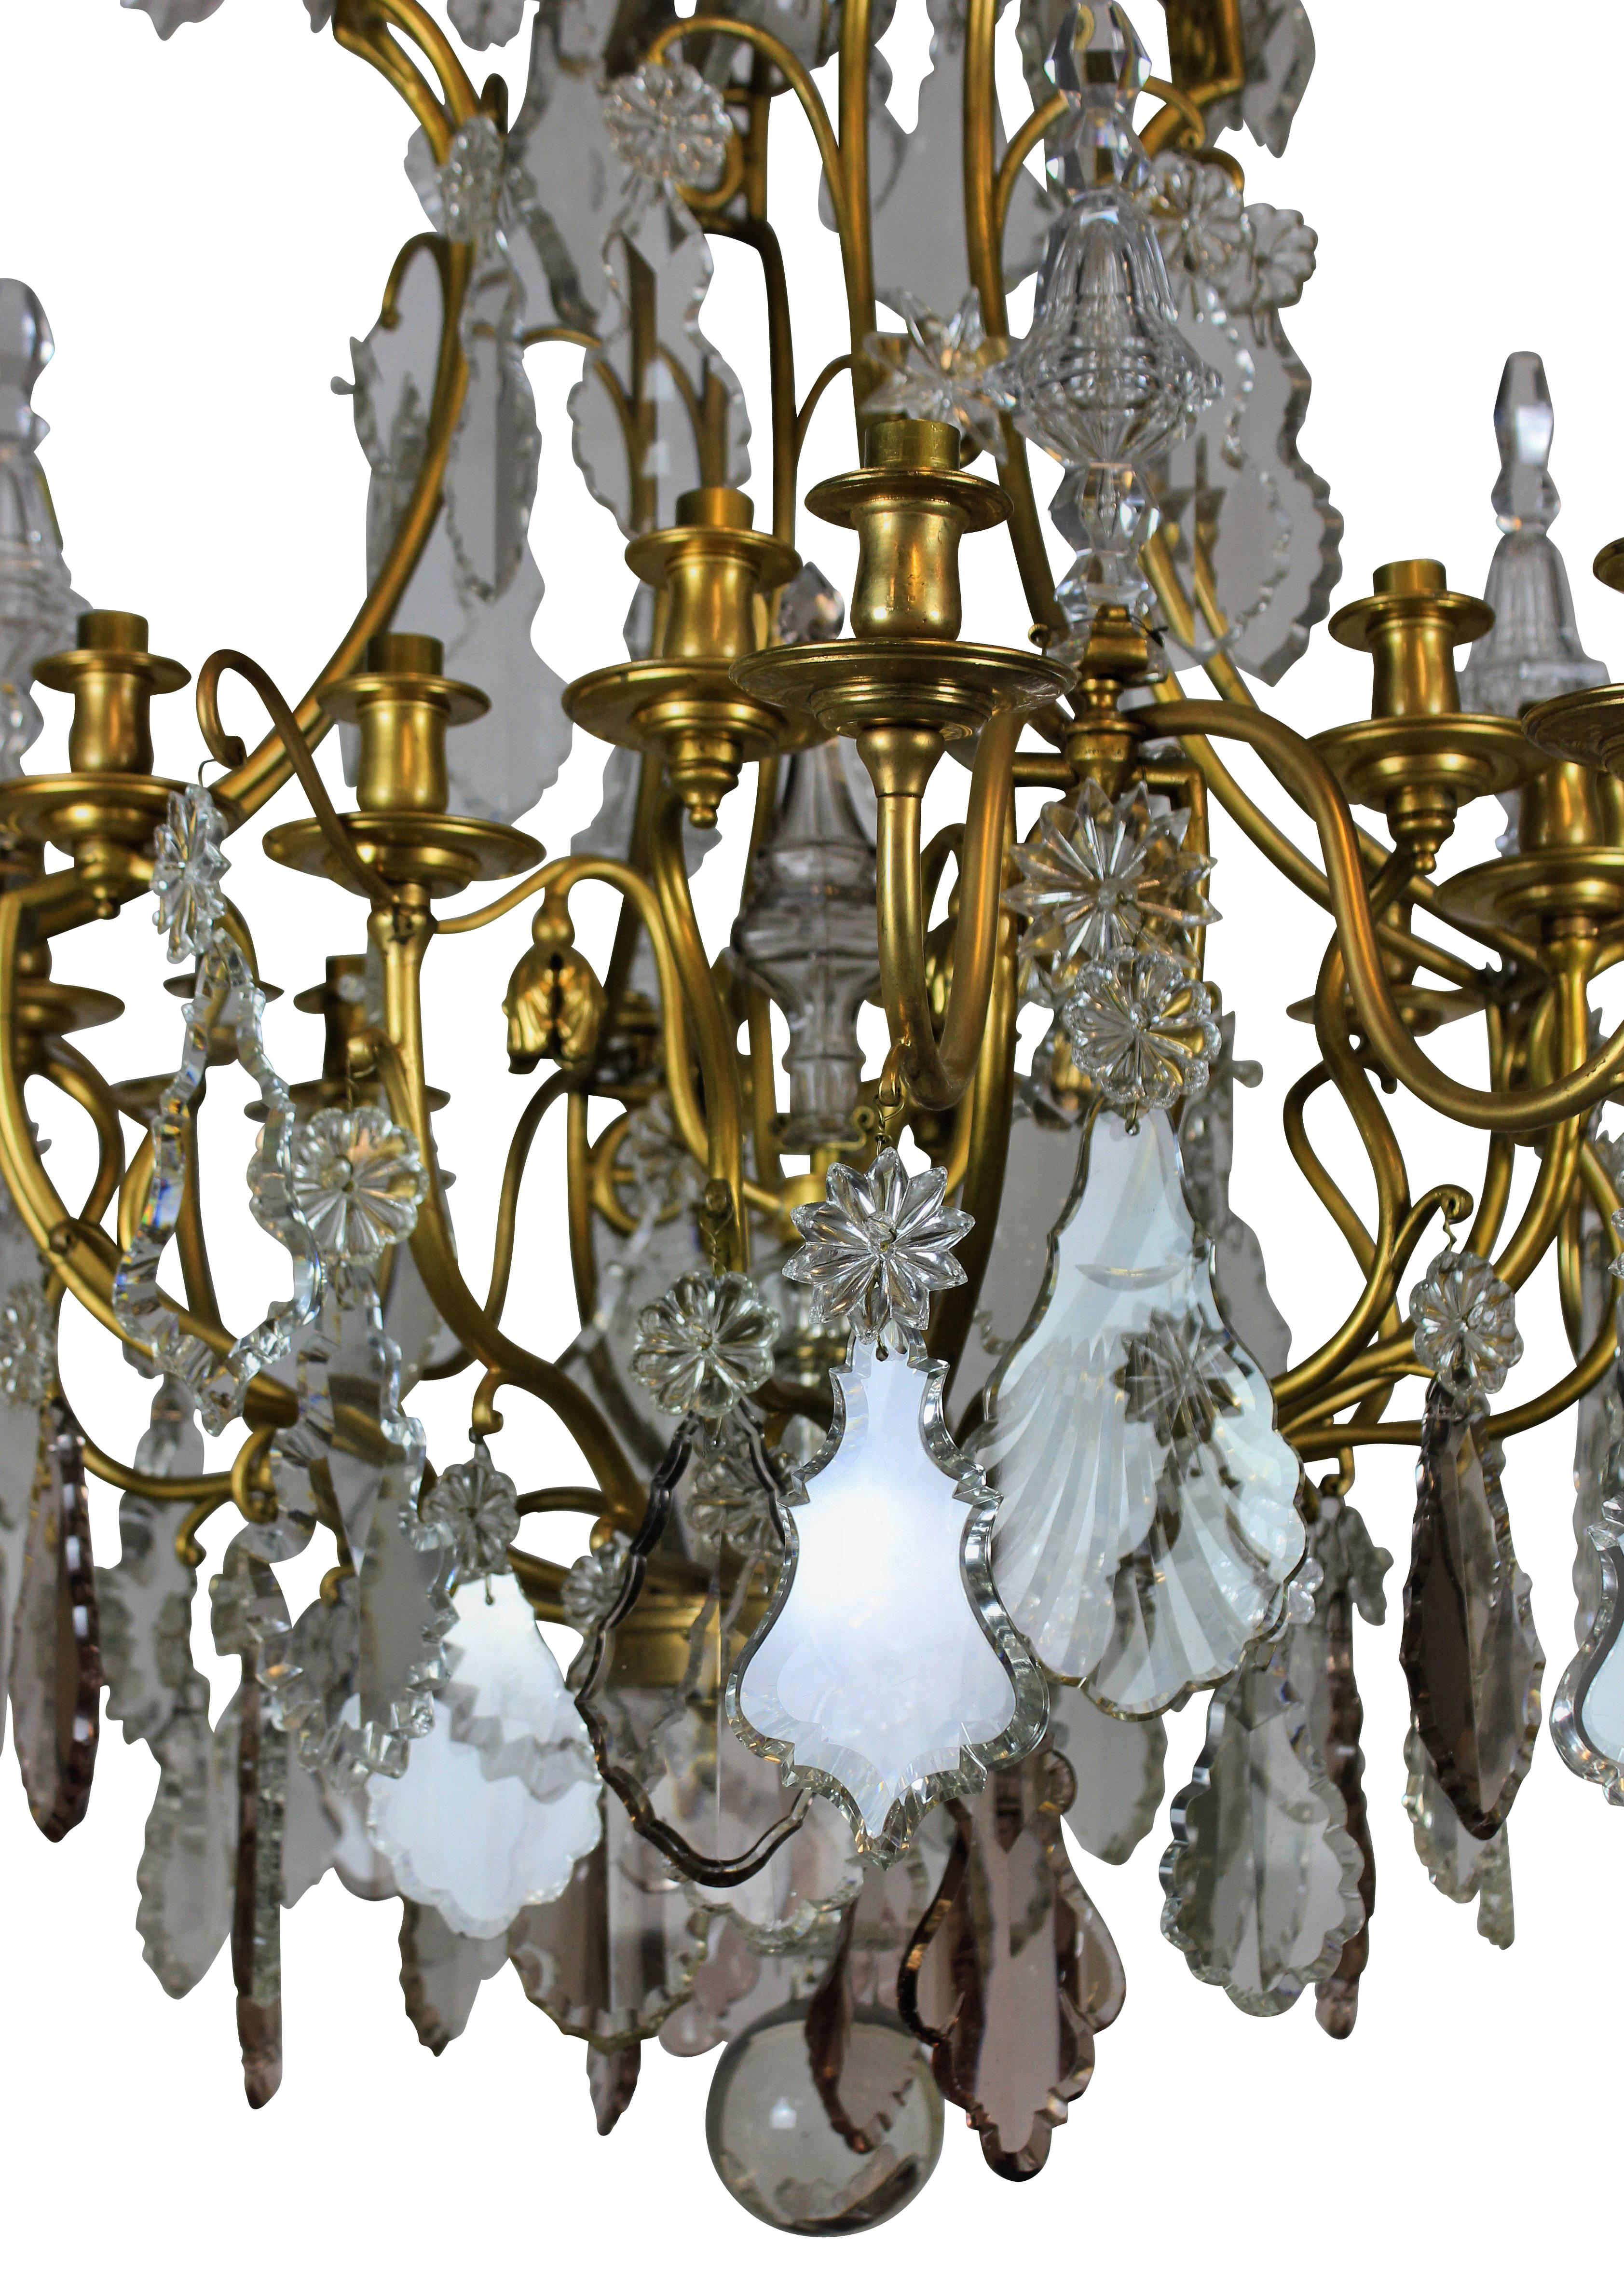 Large and Impressive Cut Glass Chandelier by Baccarat of Paris 1